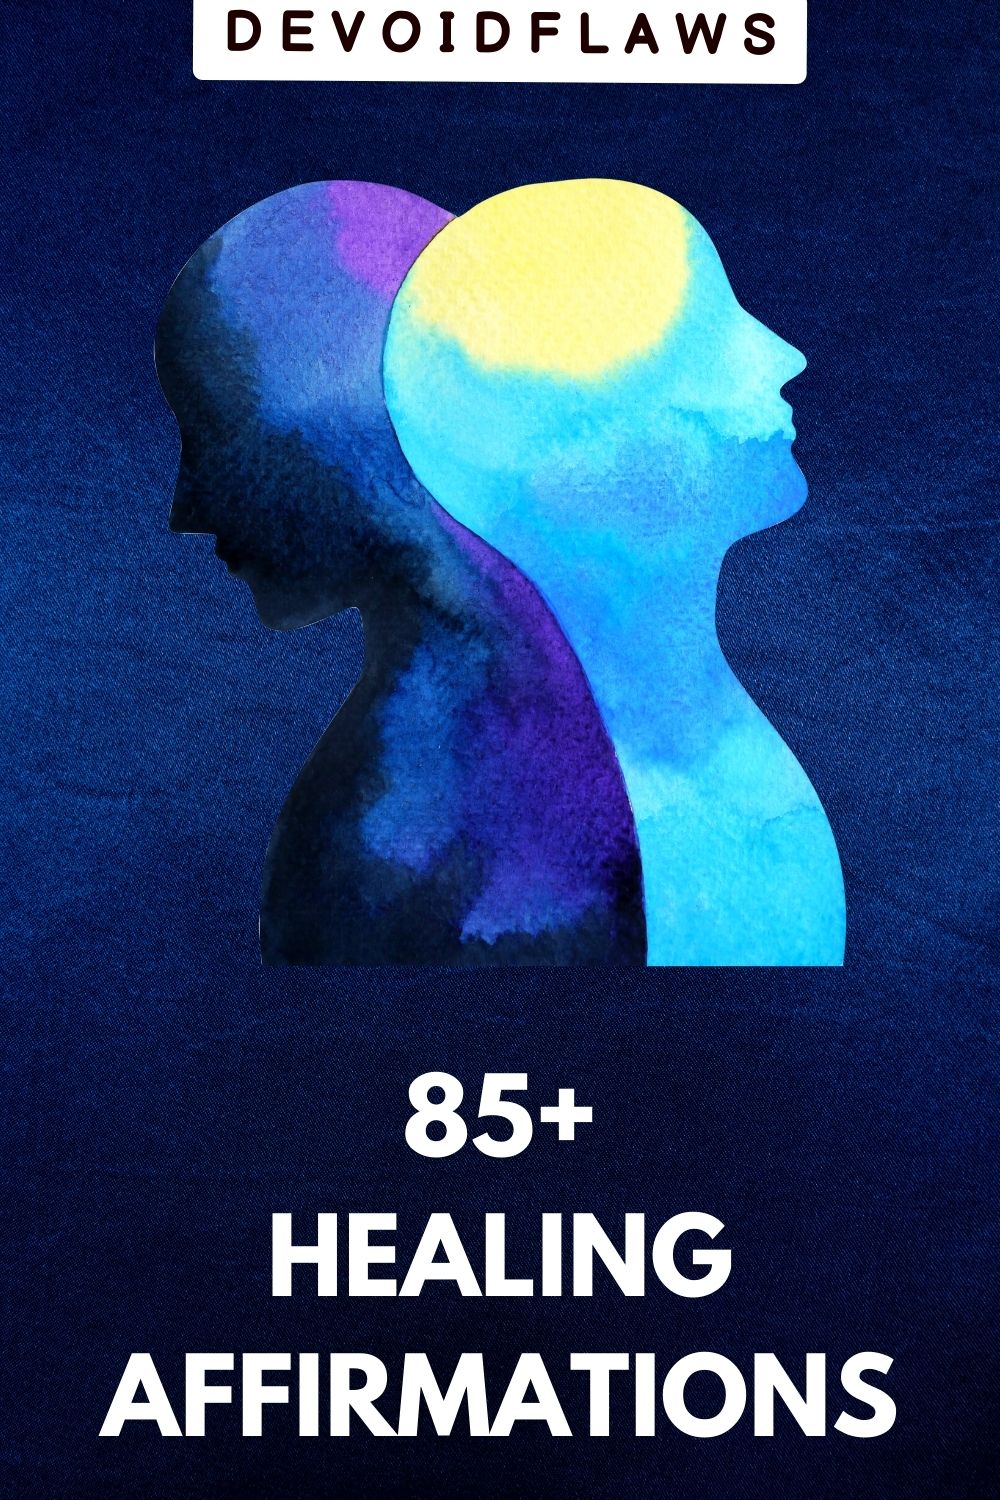 blue background image with text - 85+ healing affirmations